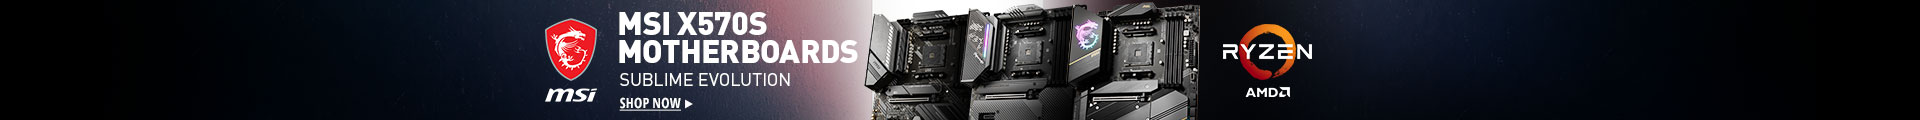 MSI X570S MOTHERBOARDS